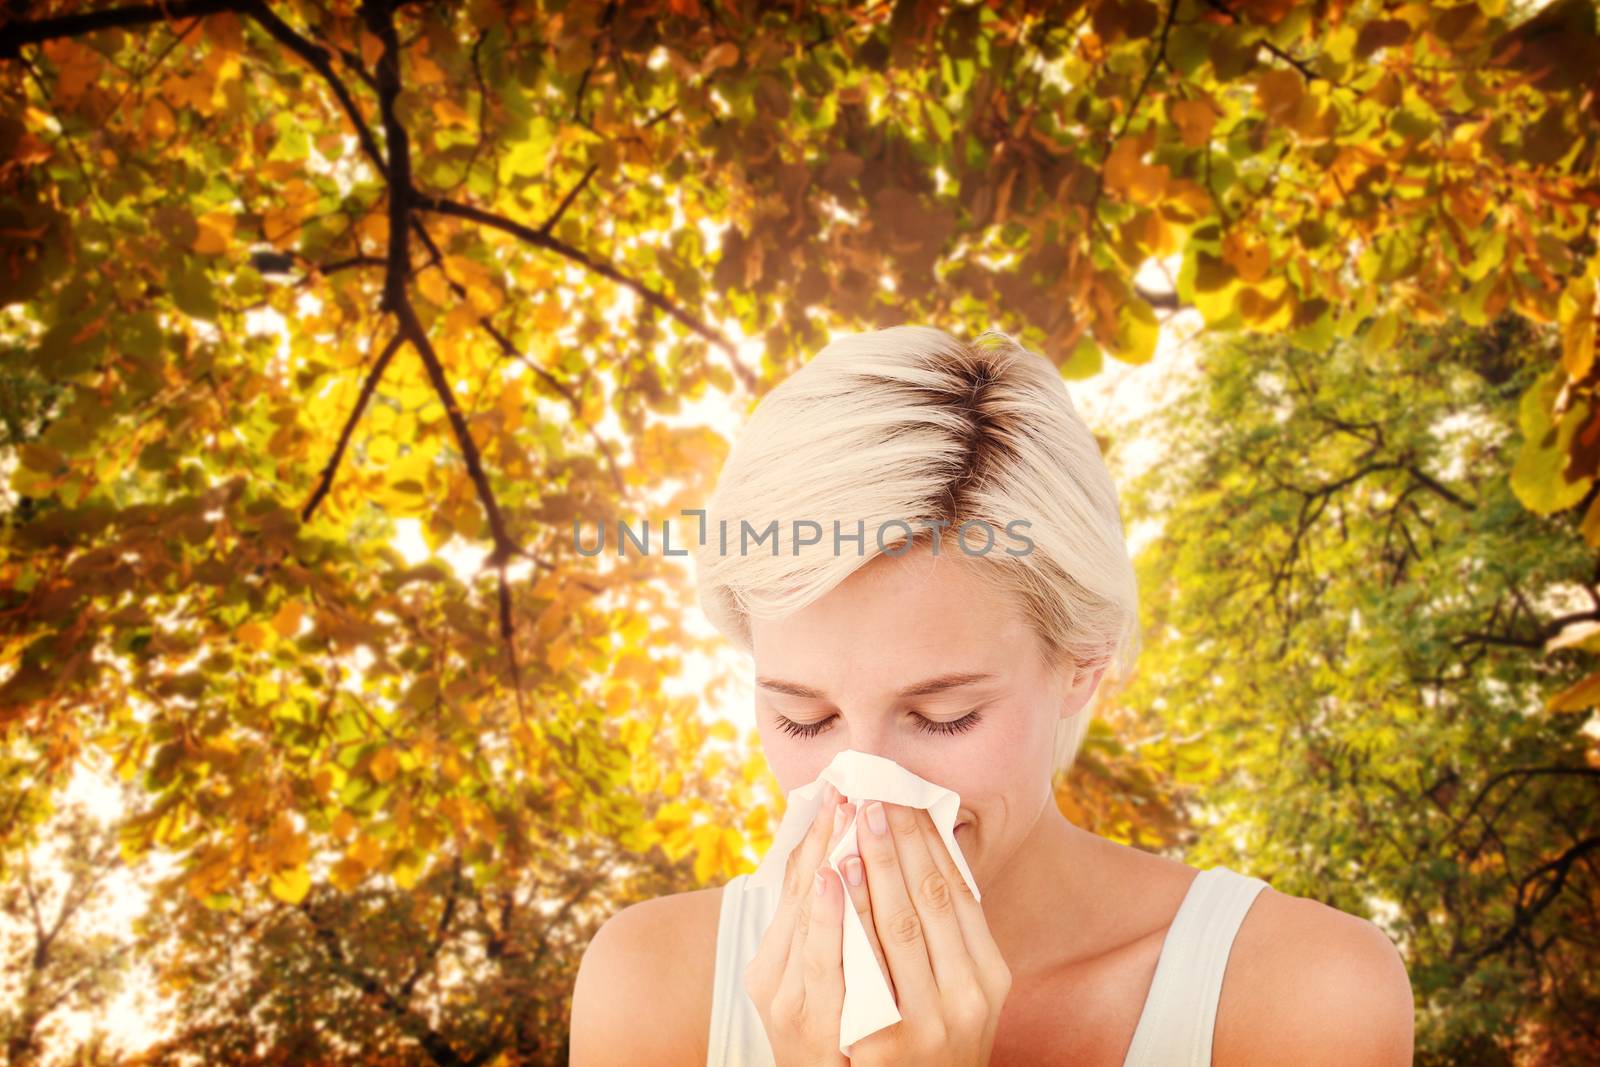 Sick woman blowing her nose against branches and autumnal leaves against the sunlight